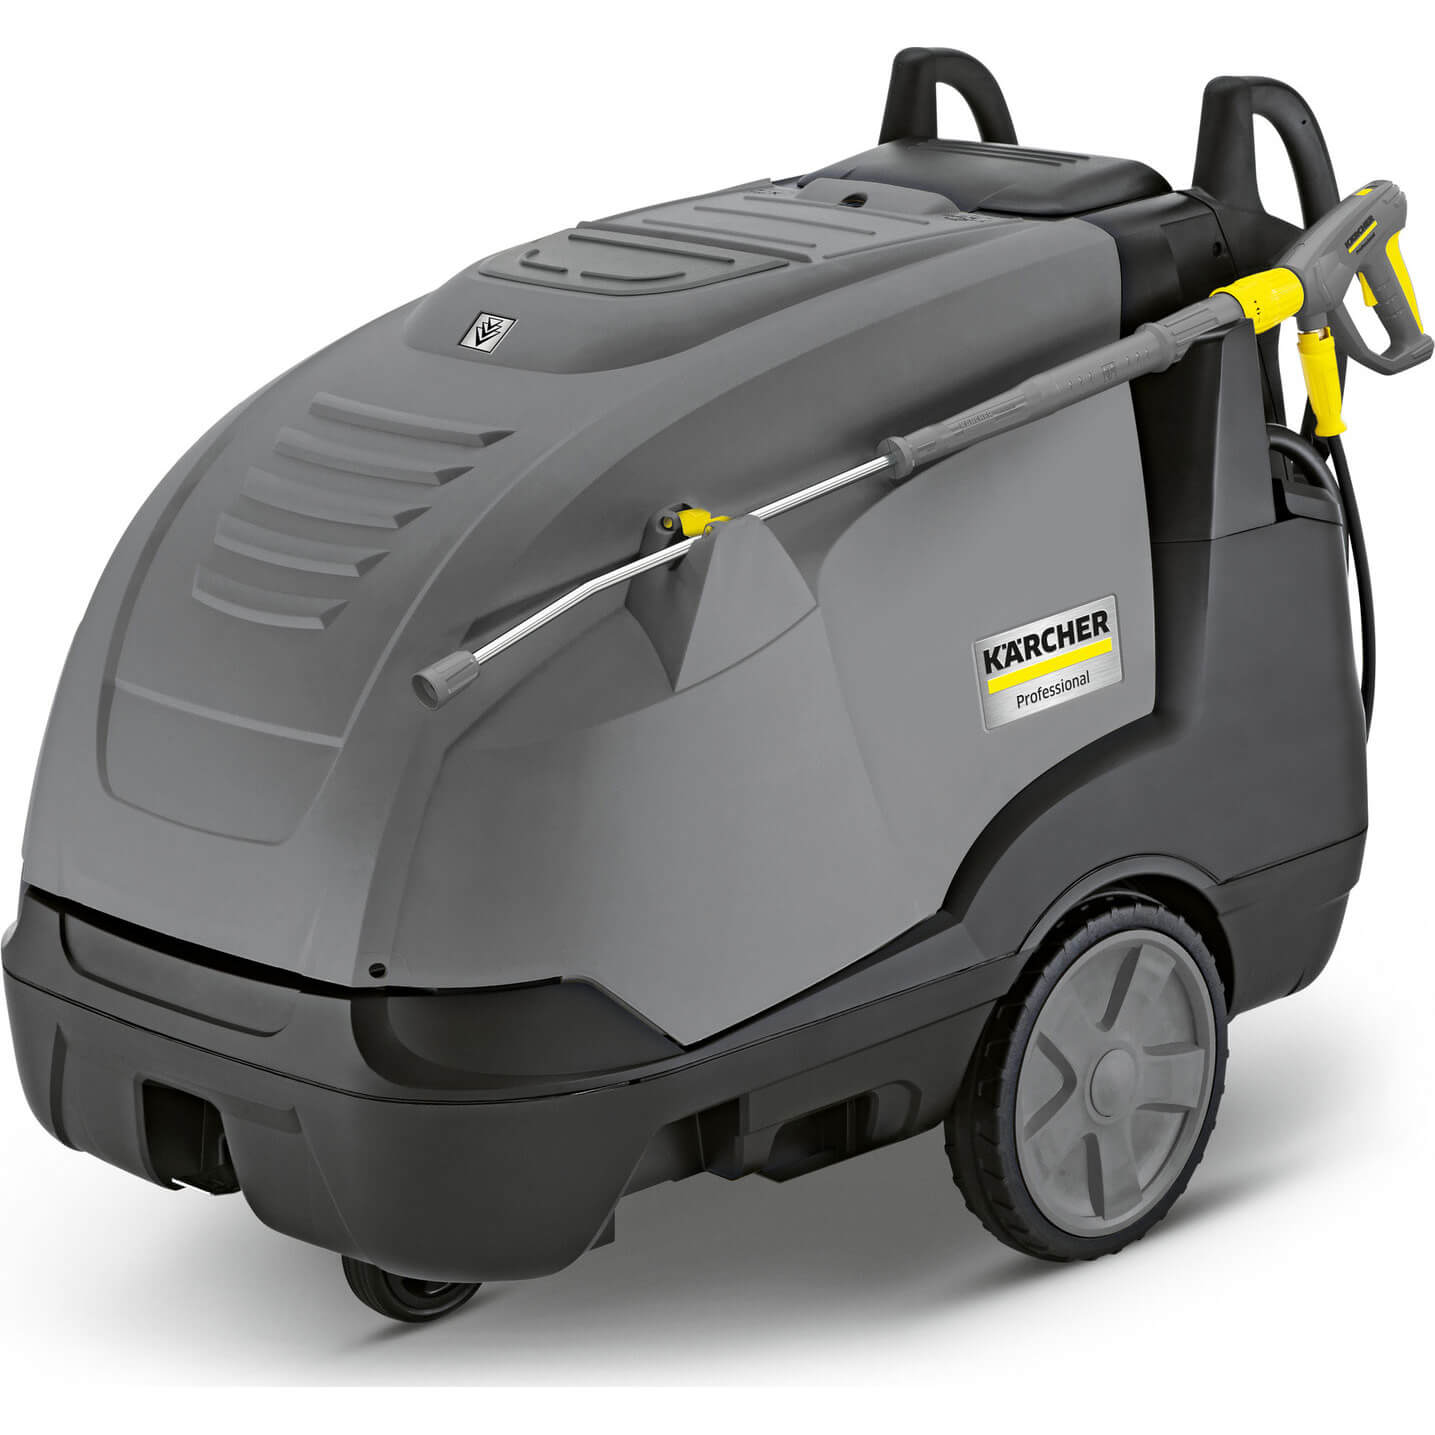 Image of Karcher HDS-E 8/16-4 M 12Kw Professional Hot Water Pressure Washer 160 Bar